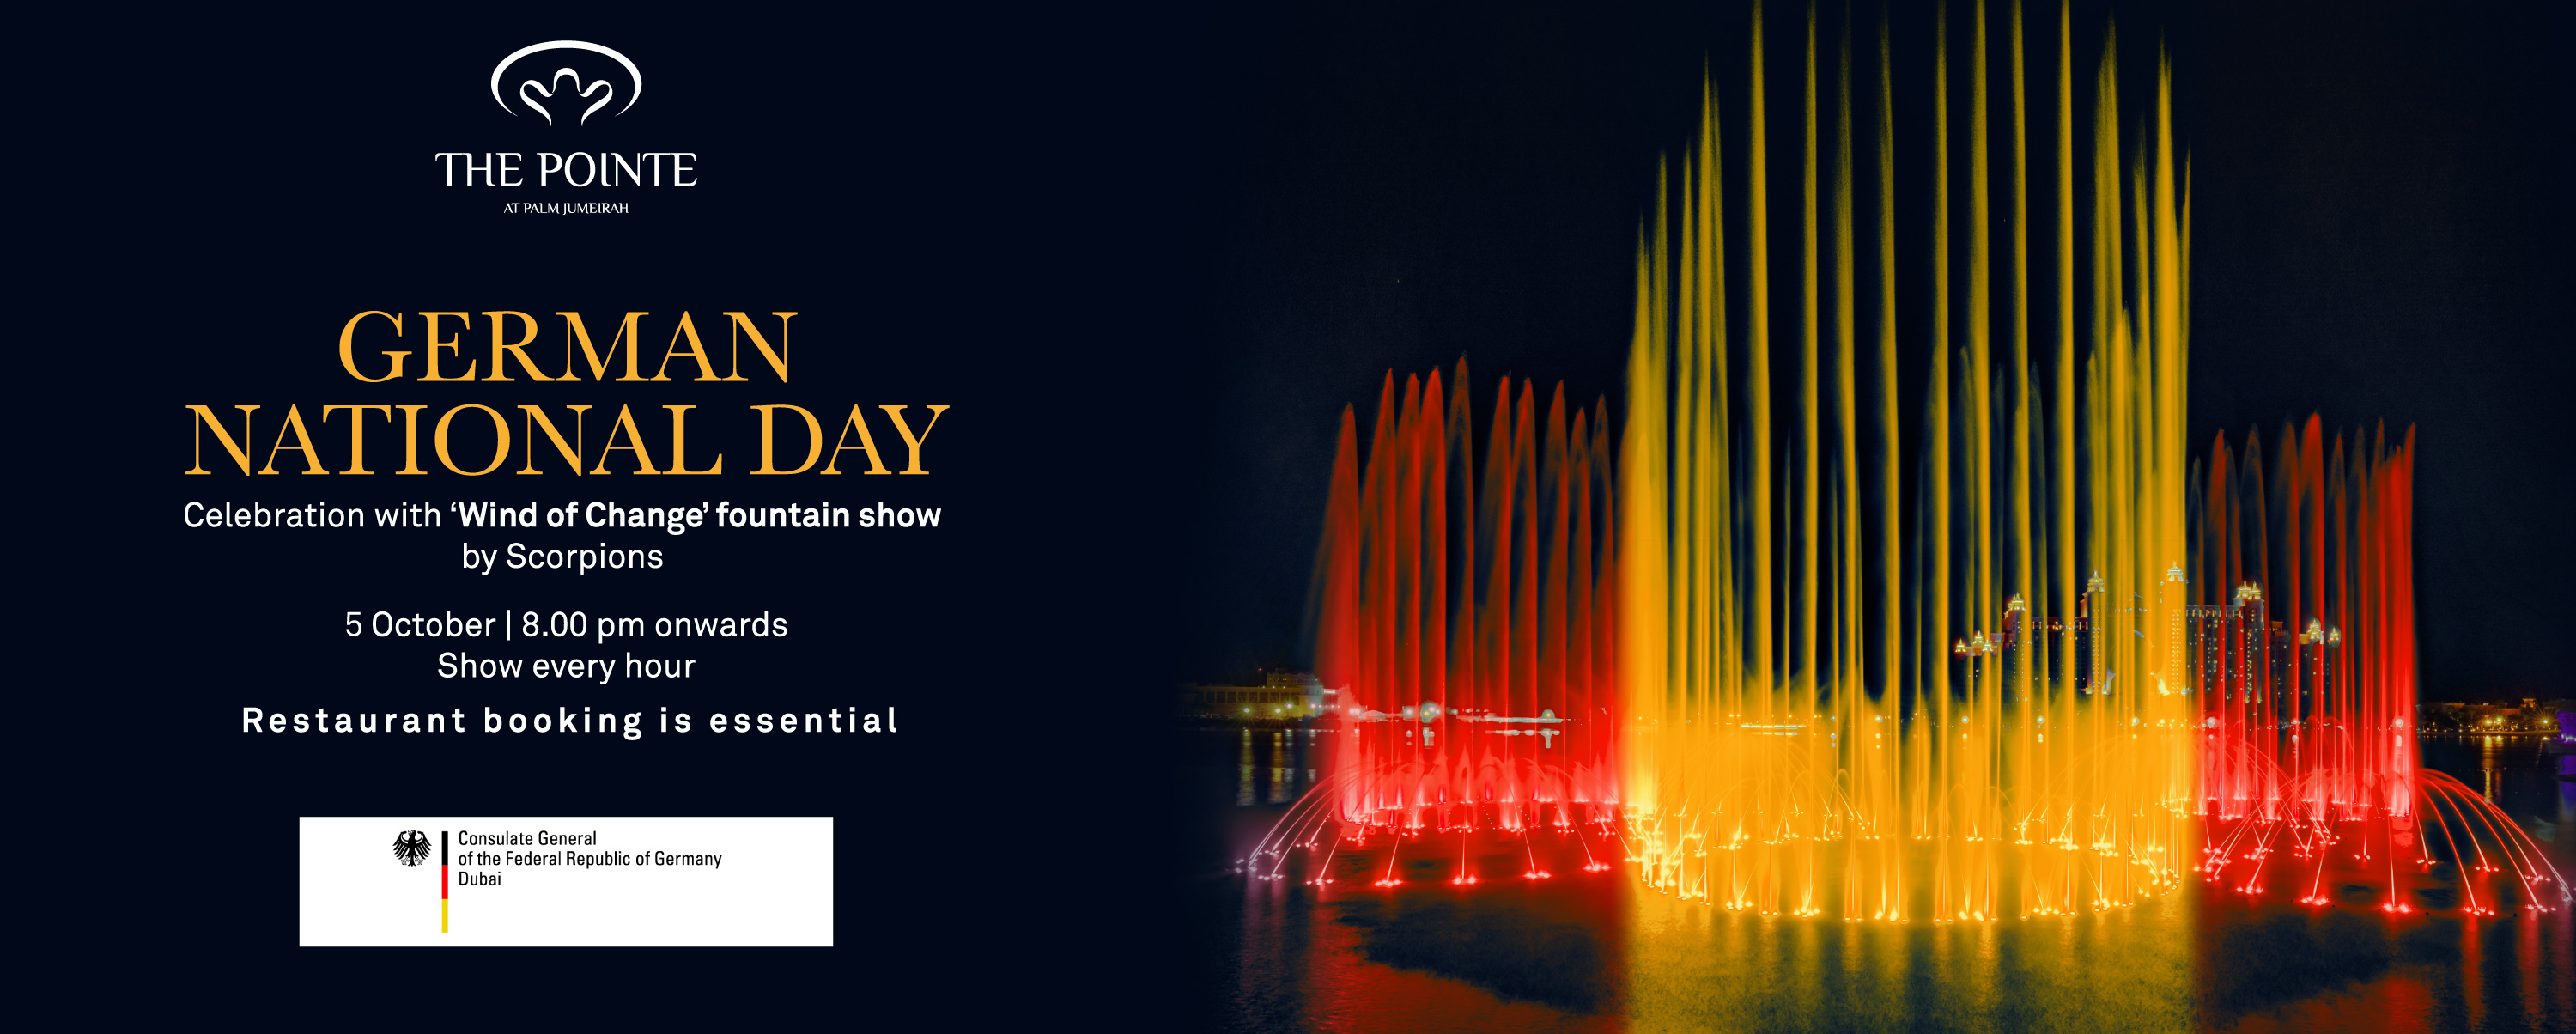 German national Day offer